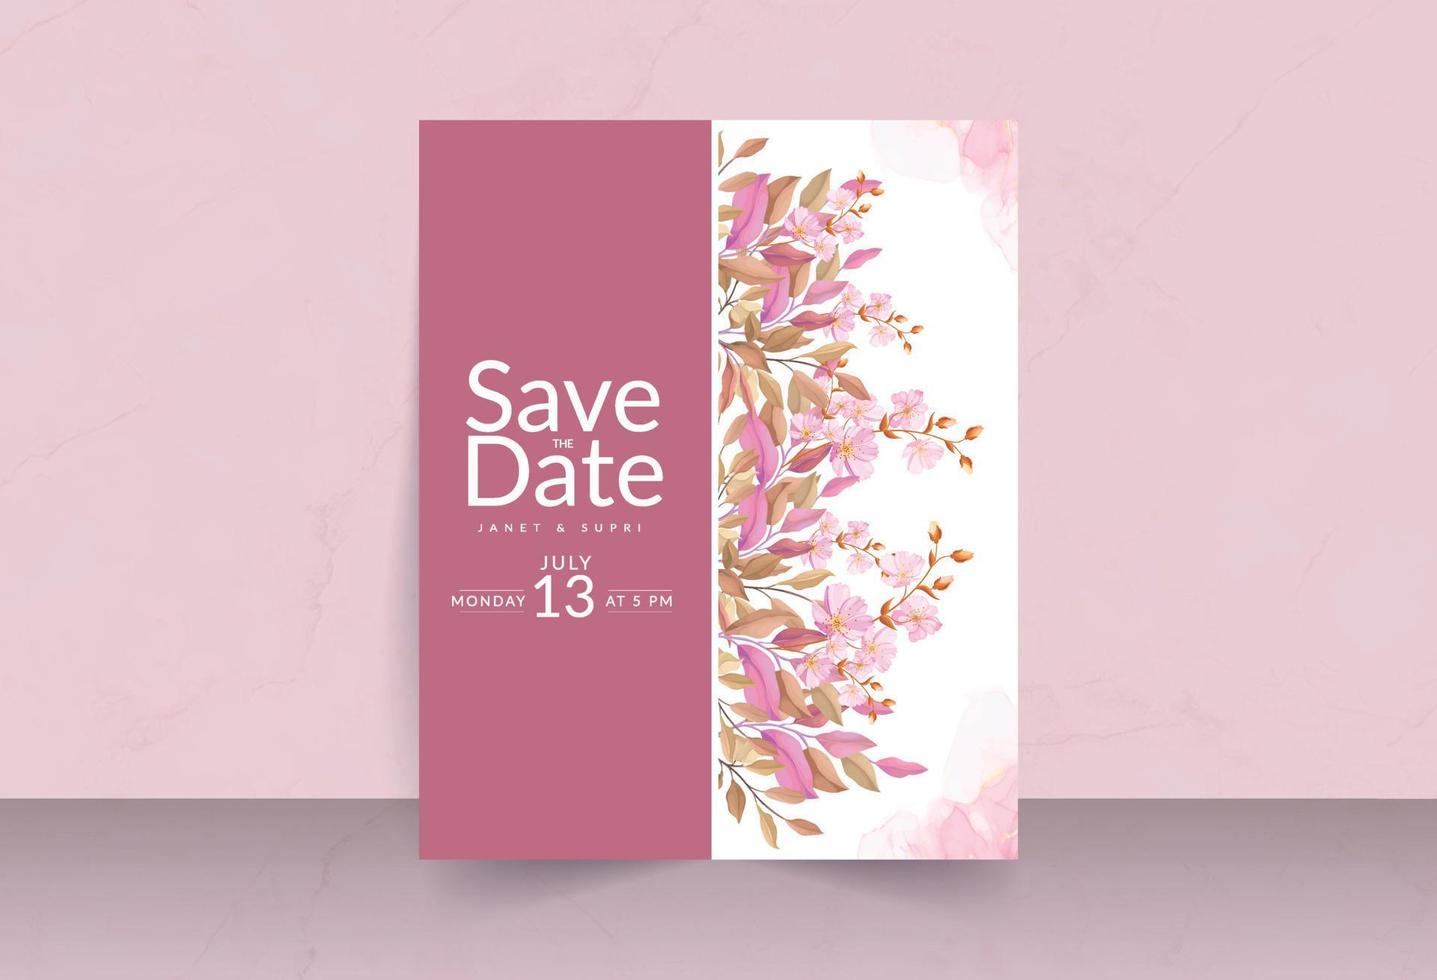 Deep pink flower bouquet with smokey watercolor effect and solid background save the date card vector